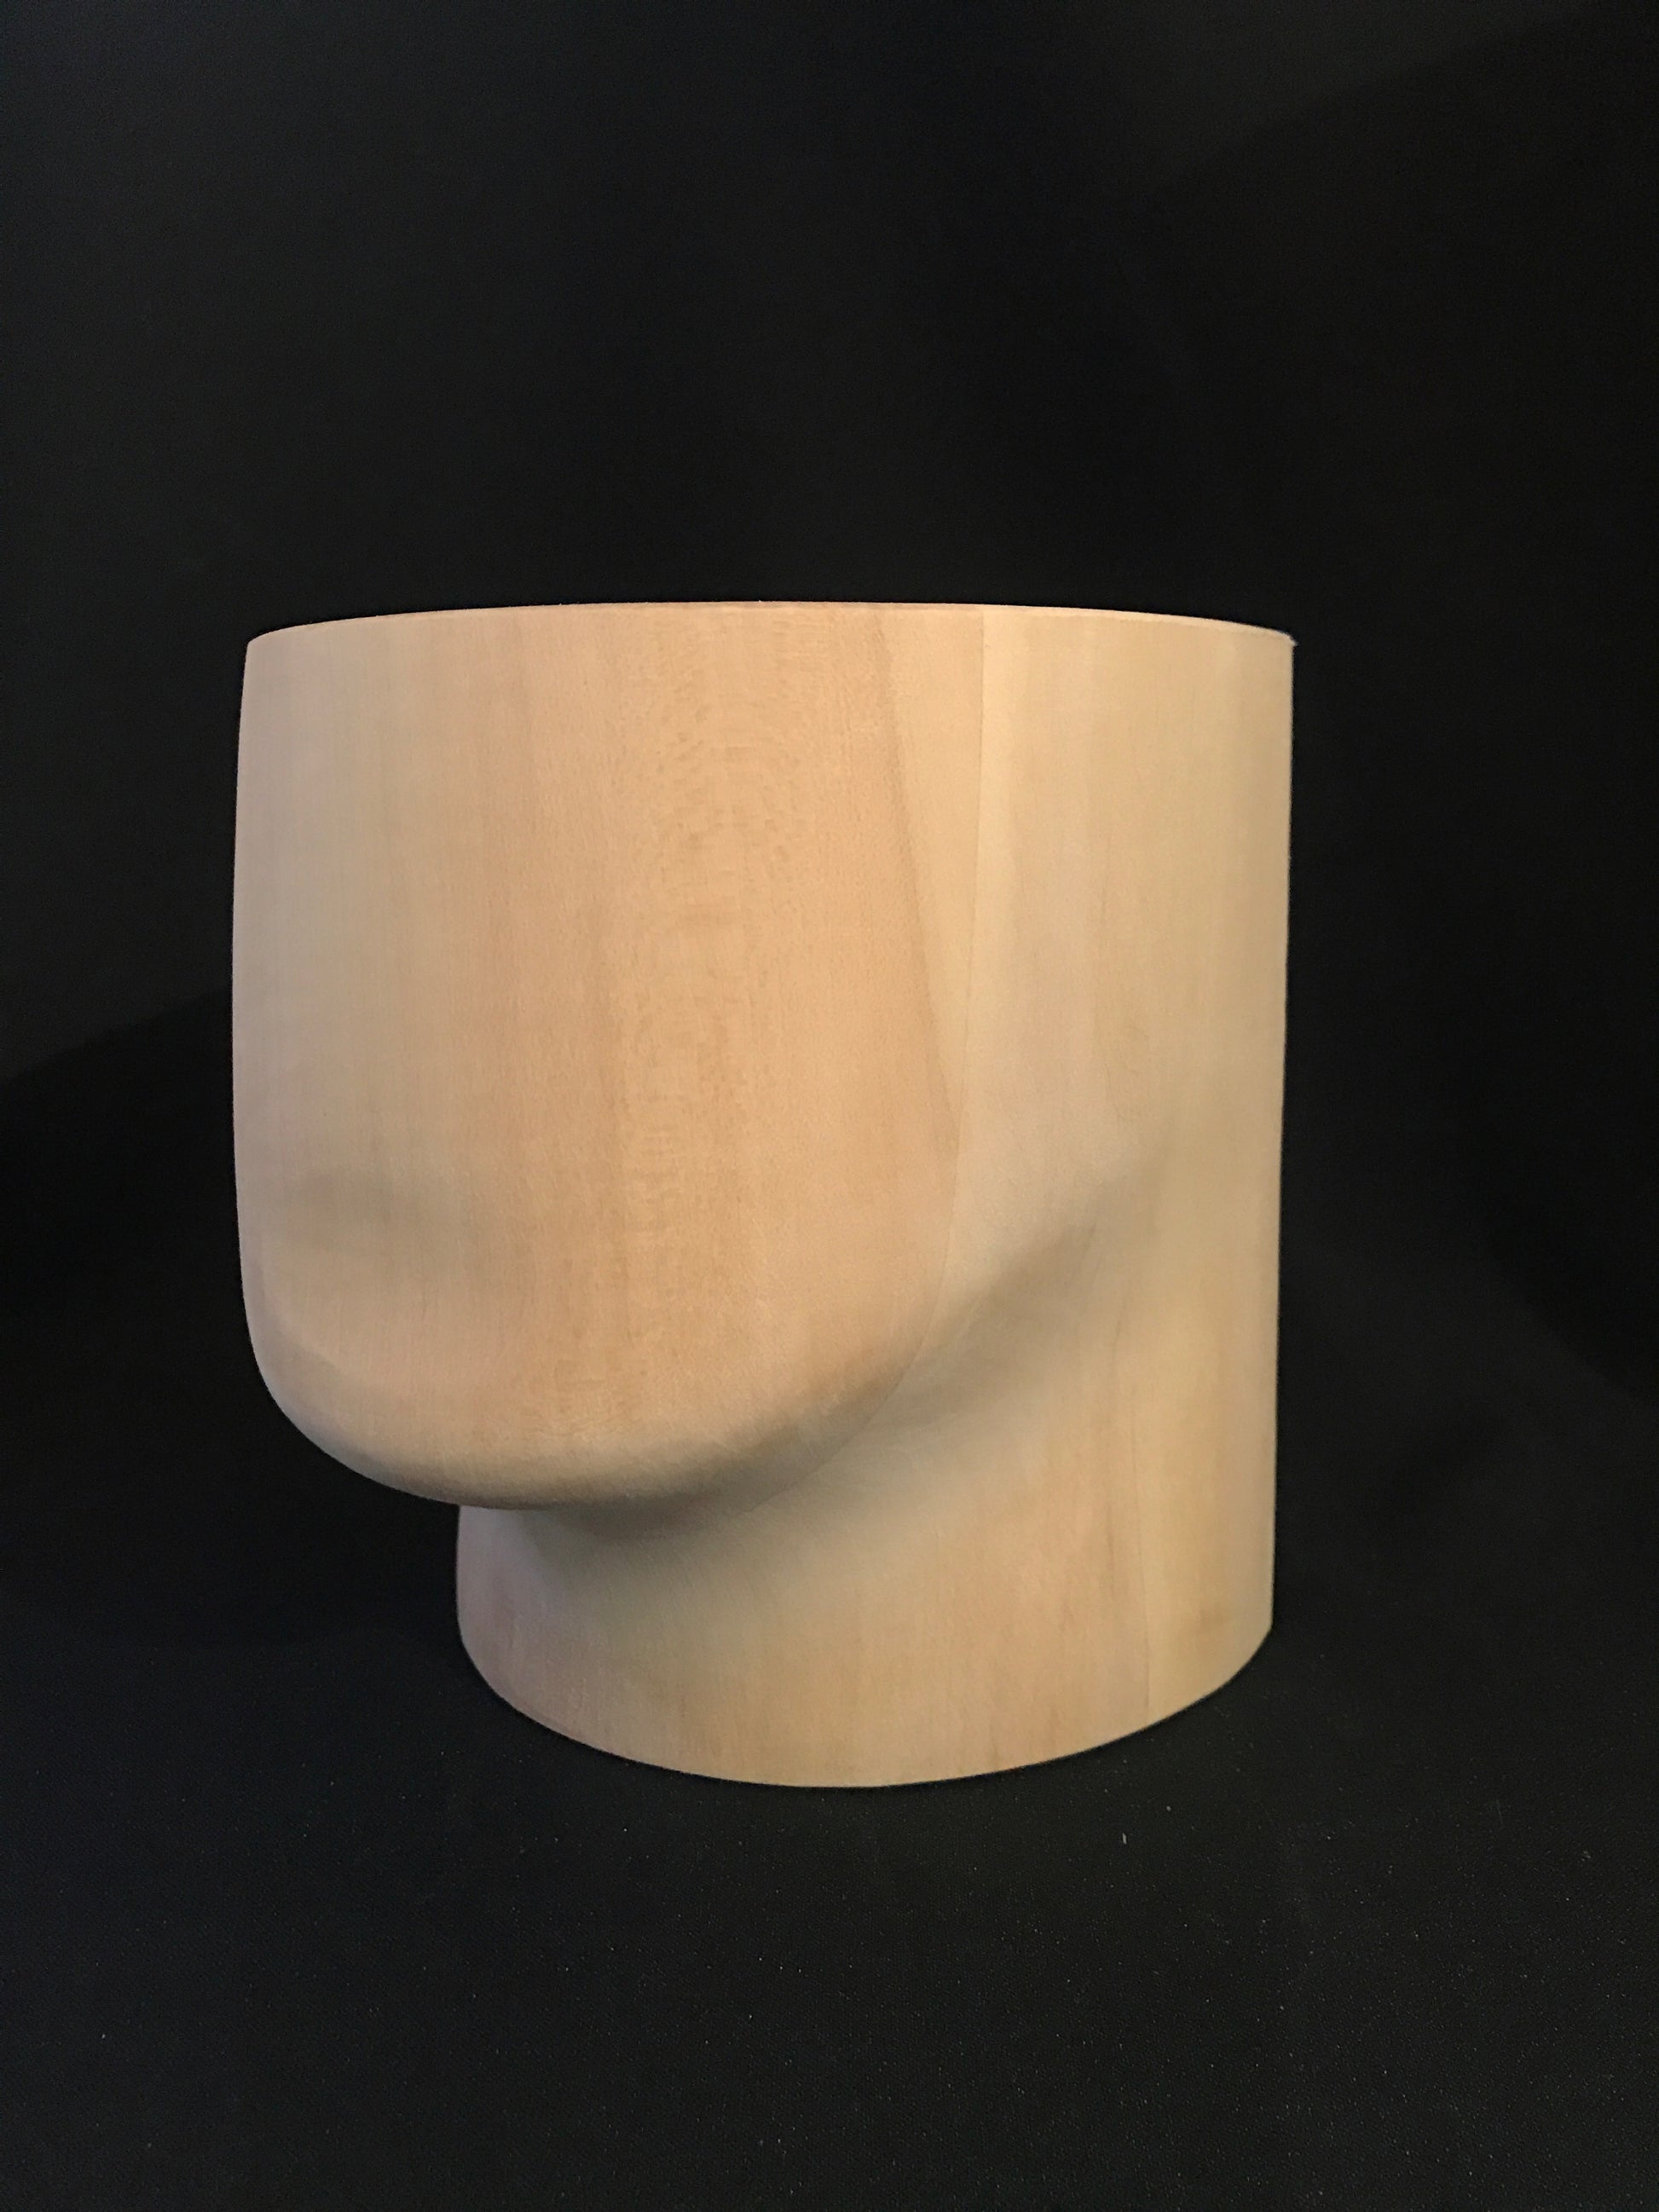 Wood chin block for making beards - The Wig Department